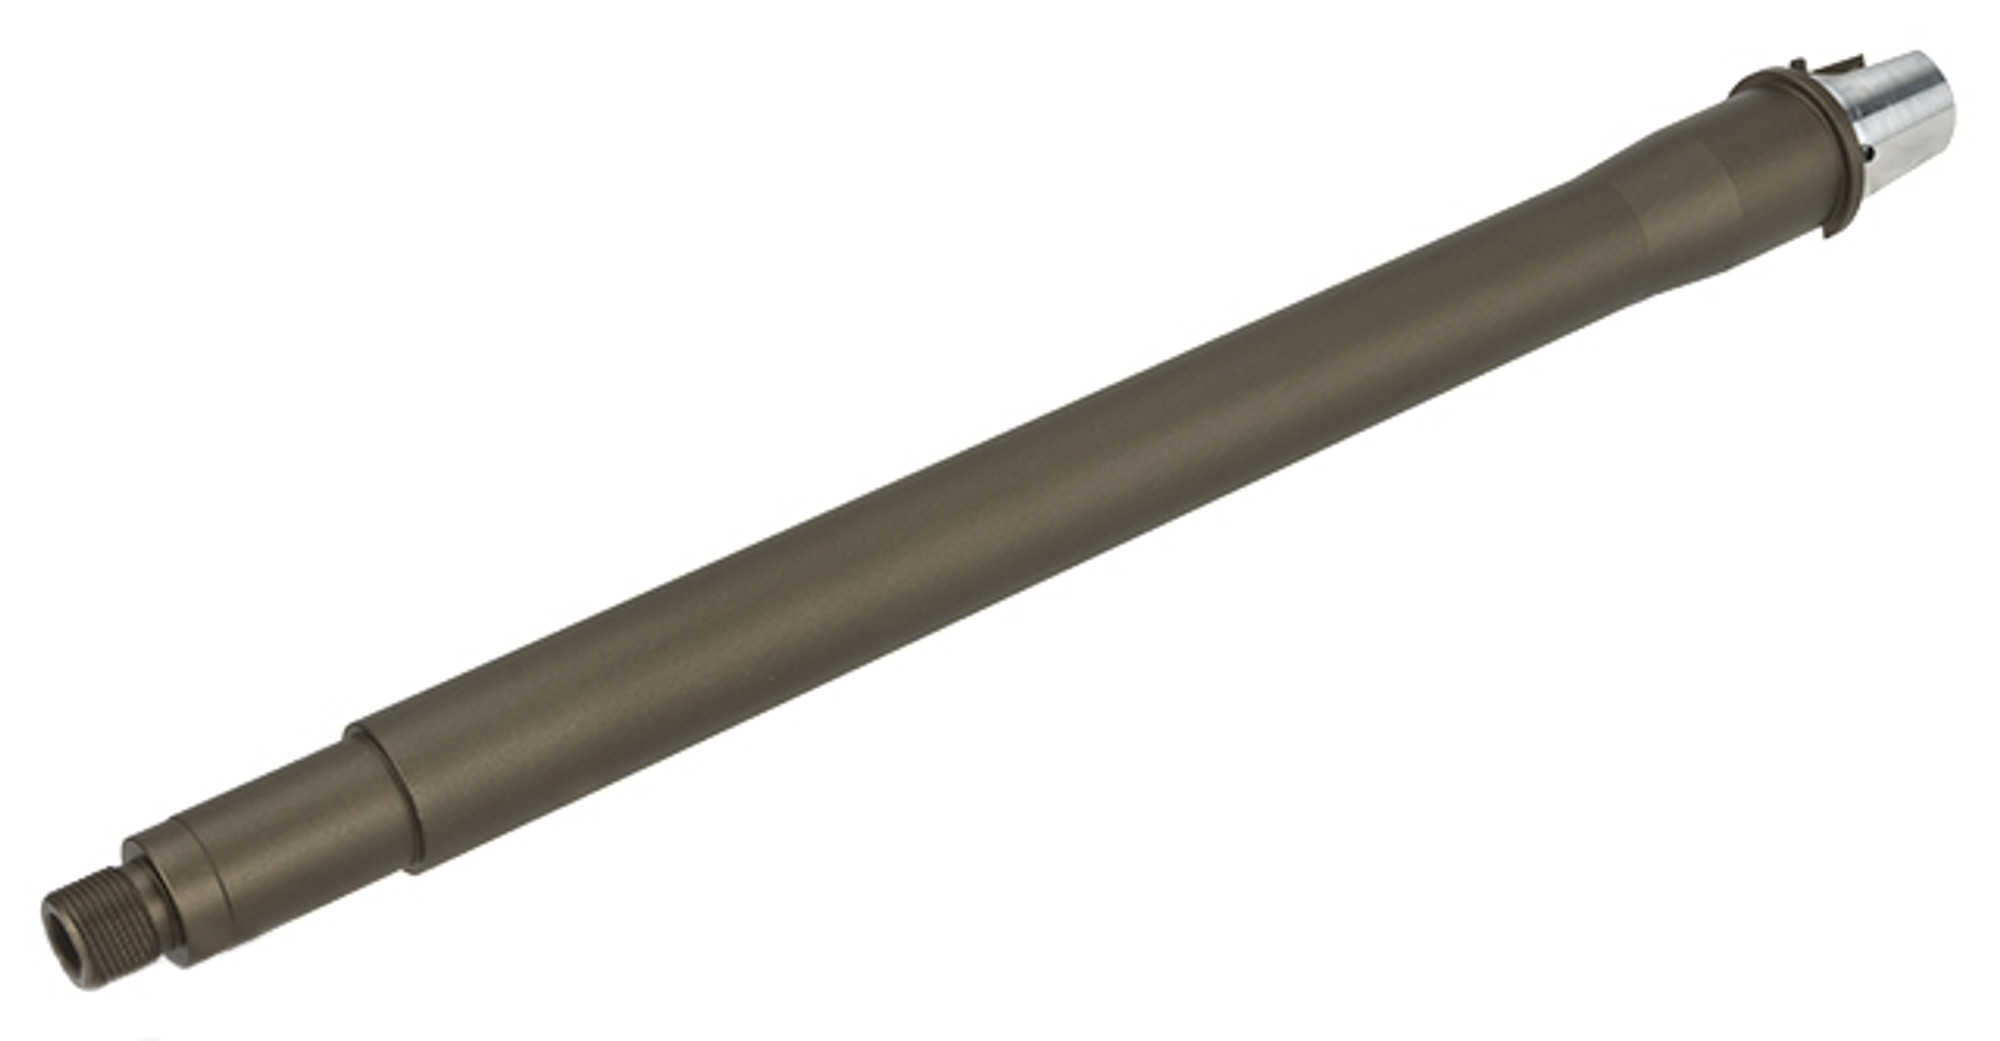 G&P Tapered 13" Carbine Length CNC Aluminum GP-T Outer Barrel for G&P GP-T AEG Receivers - Sand